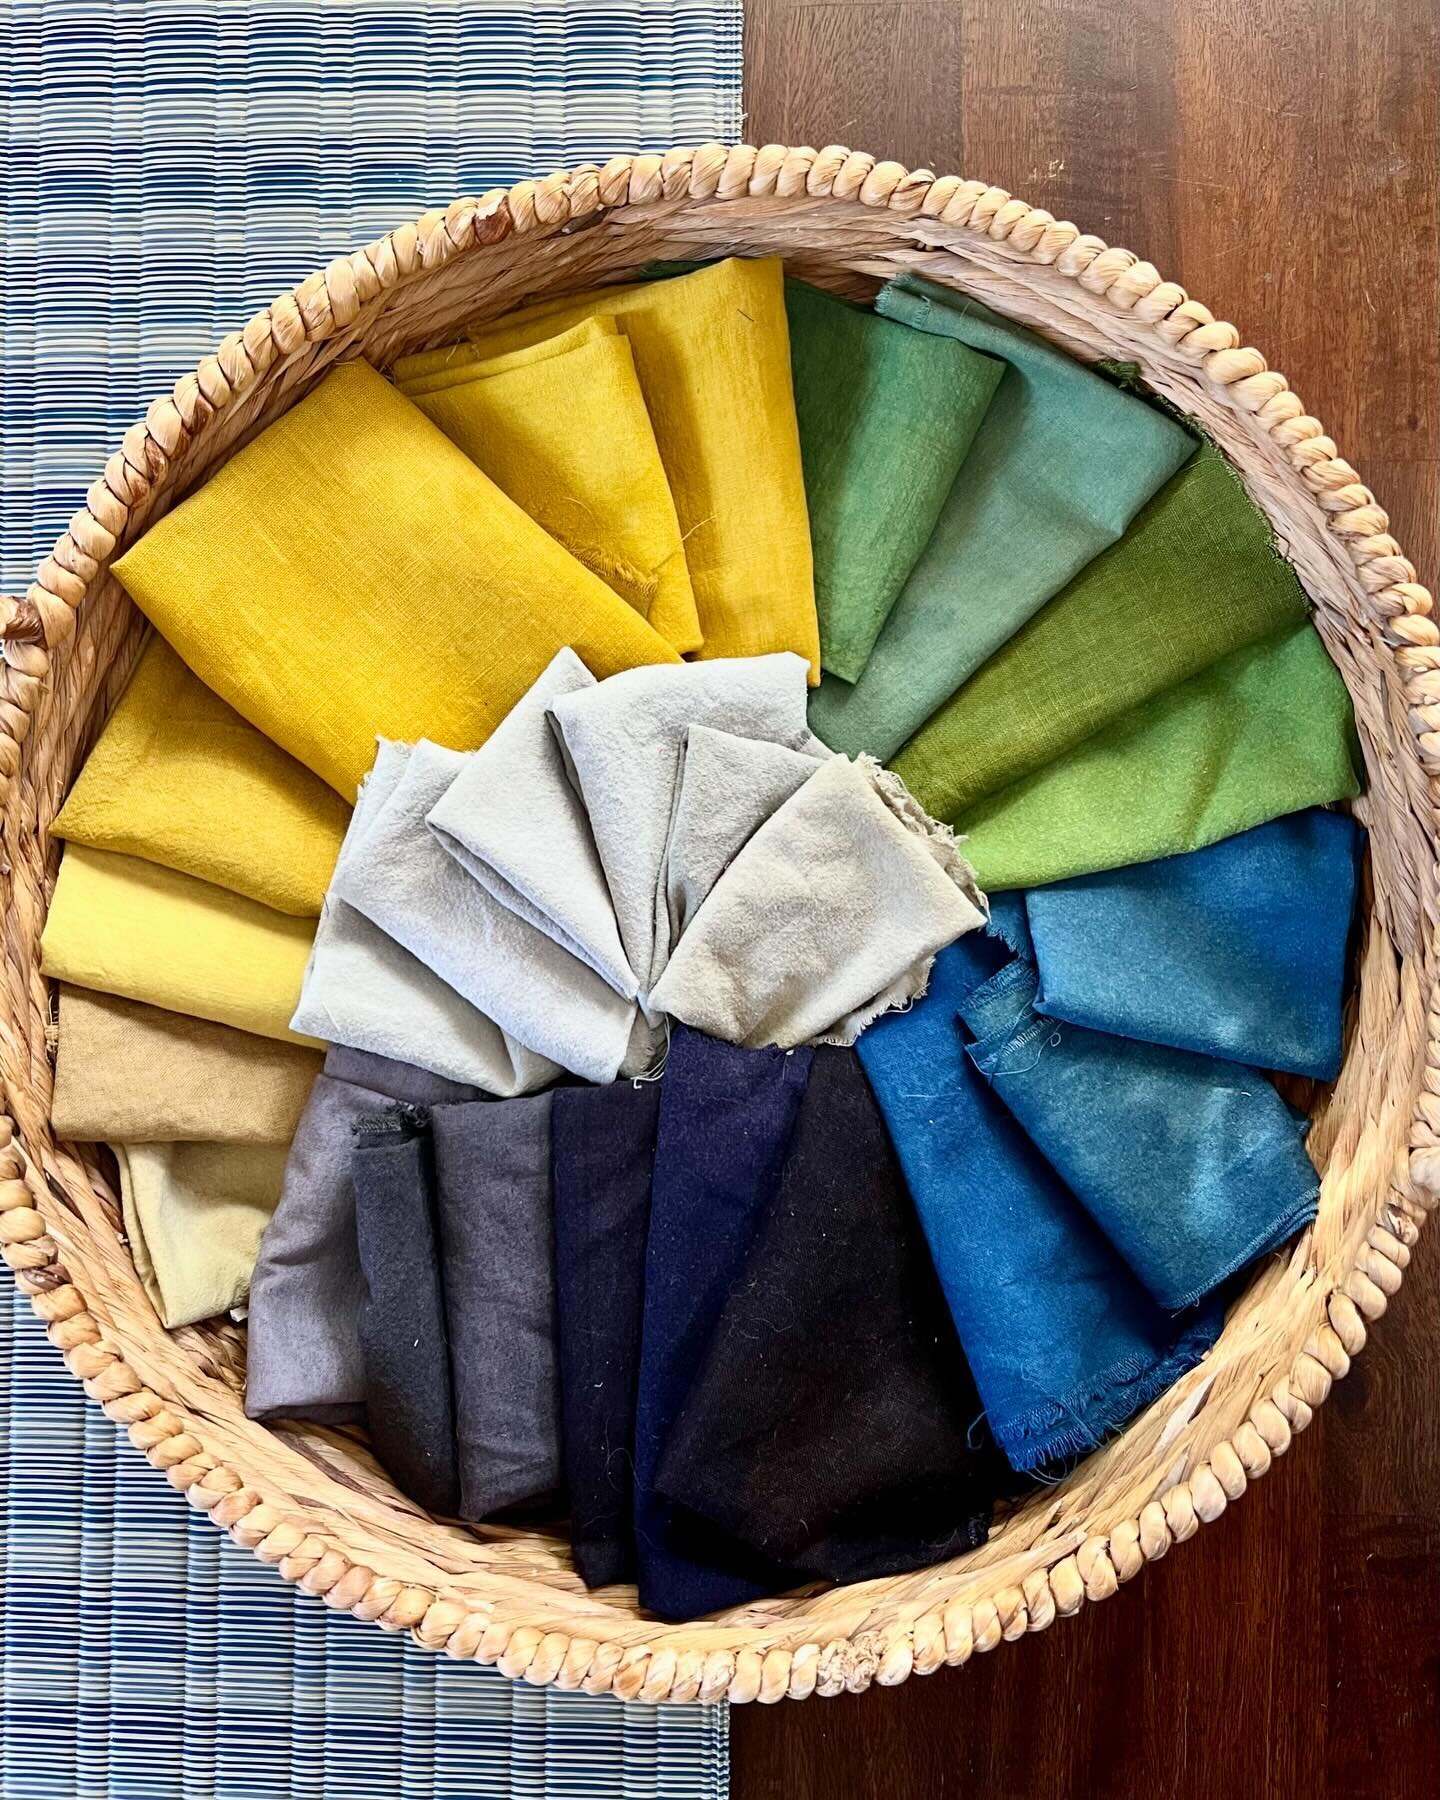 Natural dye colors lately 🌈 From logwood, marigolds, pomegranate, indigo, and mushrooms! The subtle light colors in the center are from jack o&rsquo;lantern mushrooms my son helped me forage. They make gorgeous shades of light blue and green, very h